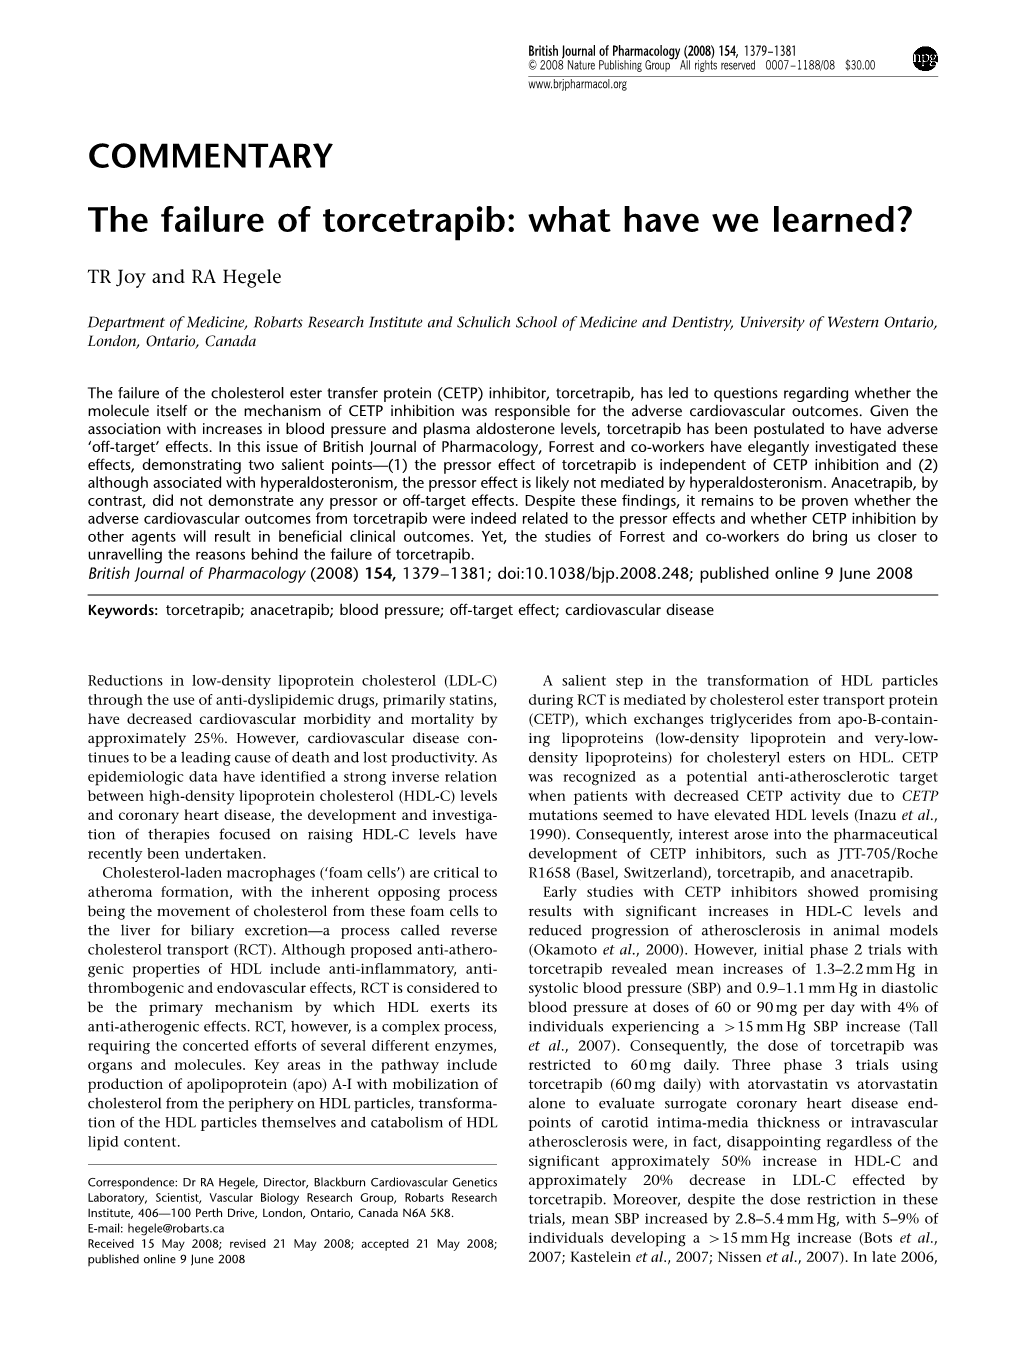 The Failure of Torcetrapib: What Have We Learned?